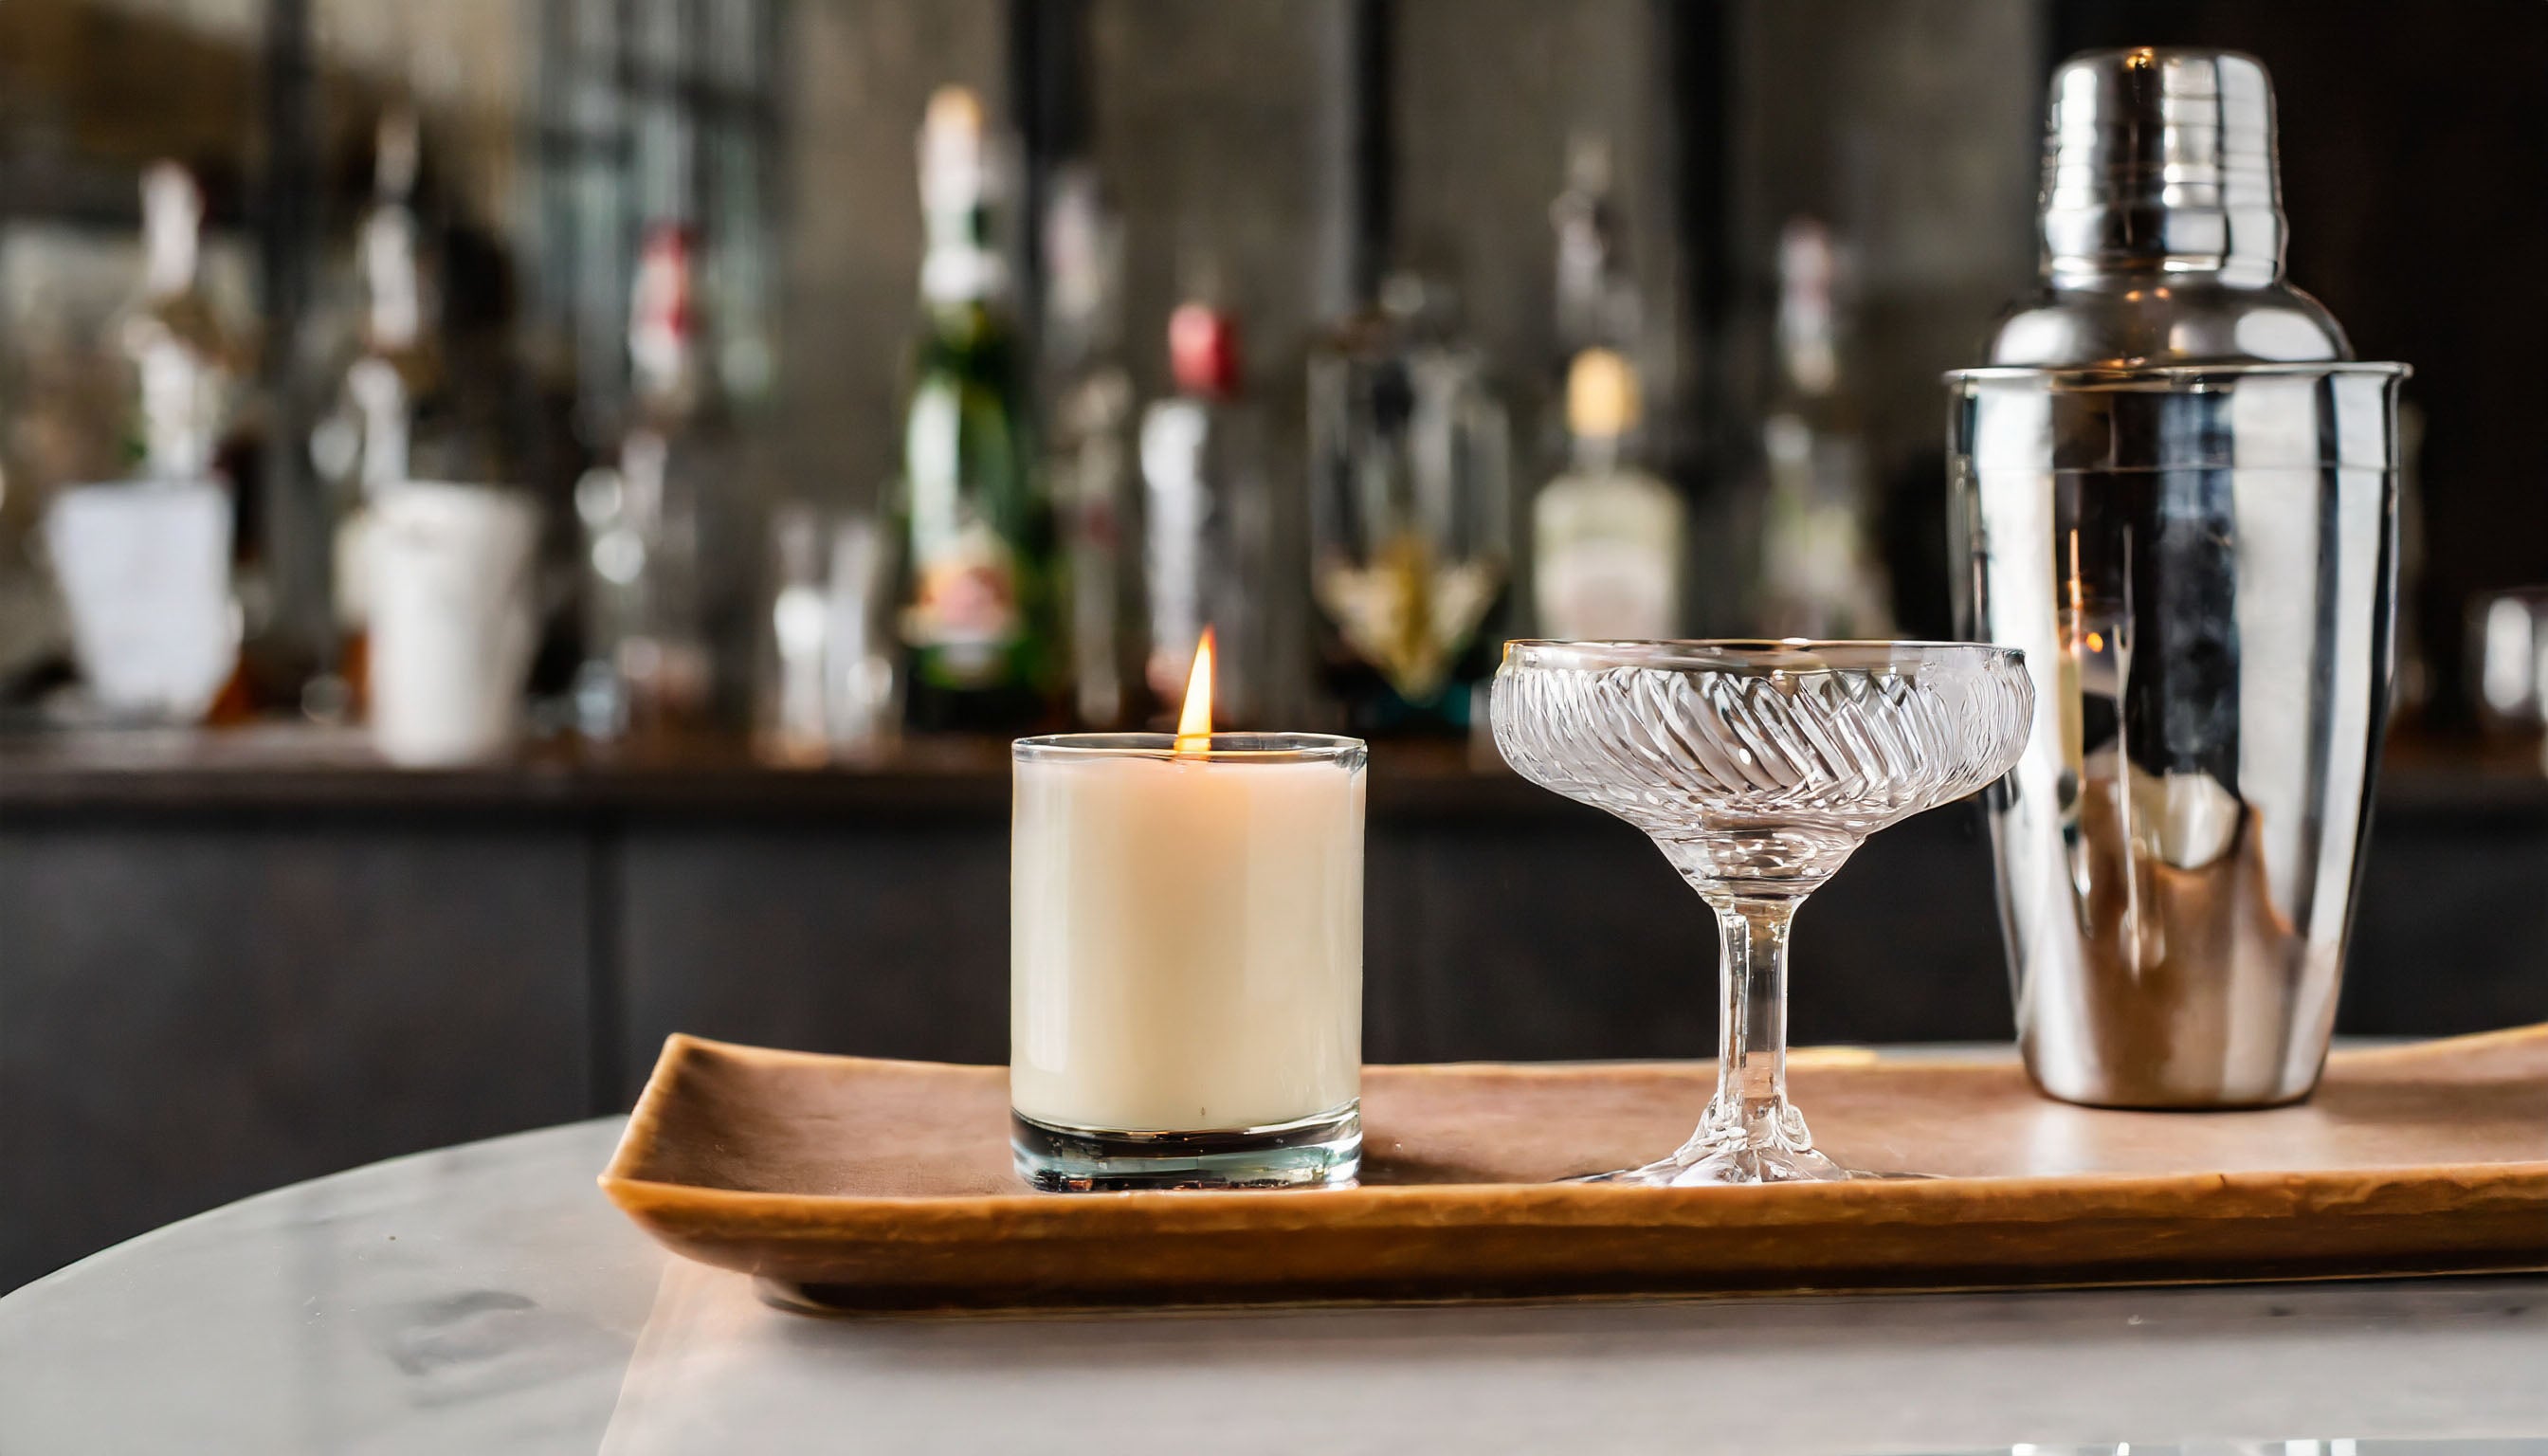 Scented soy candle styli shed on leather tray with drink glass and martini shaker with bar in background.